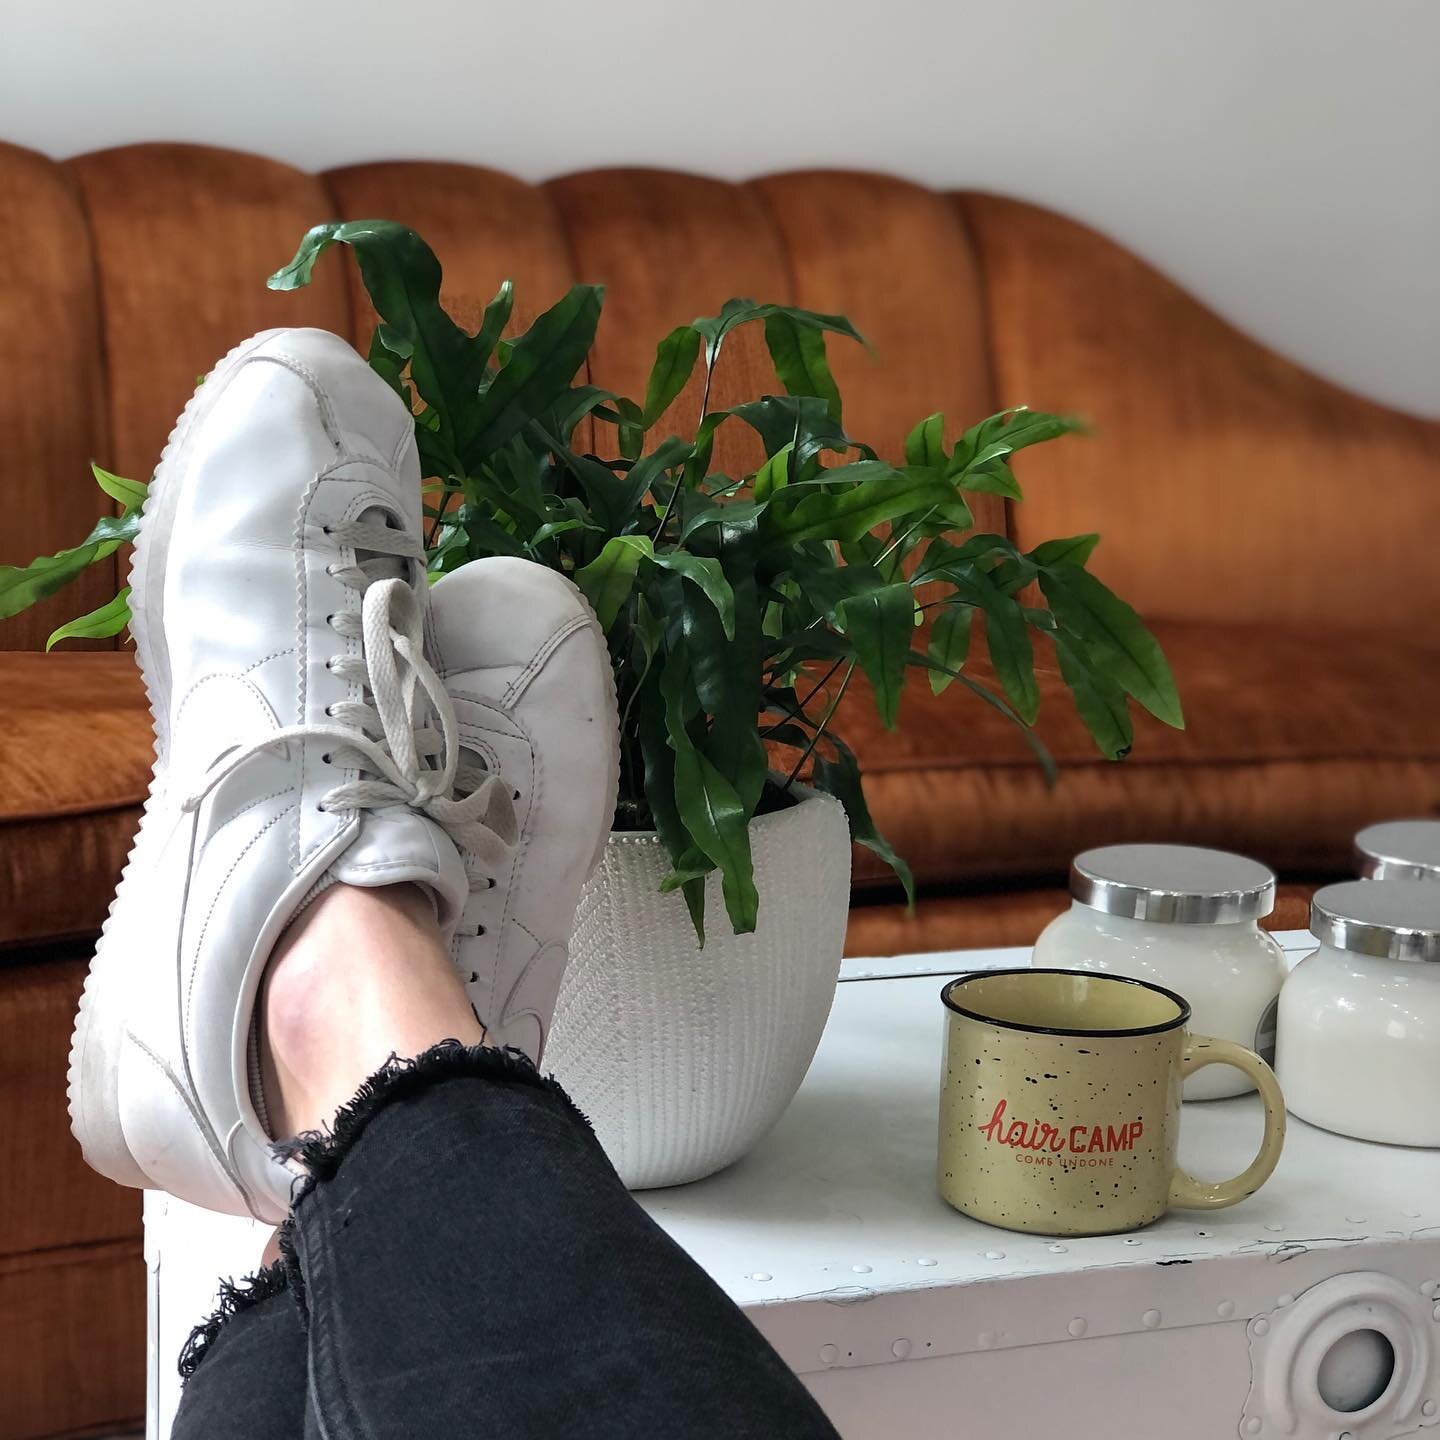 This is living.

Enjoying a cup of tea between clients and admiring this little slice of heaven that is Linmay Studio.

Enjoying the simple things on this Saturday!

🫖 Tea
🌿 Plant
⛺️ Hair Camp
👟 Nikes
🕯 Candles
🛋 Ginger (the couch)